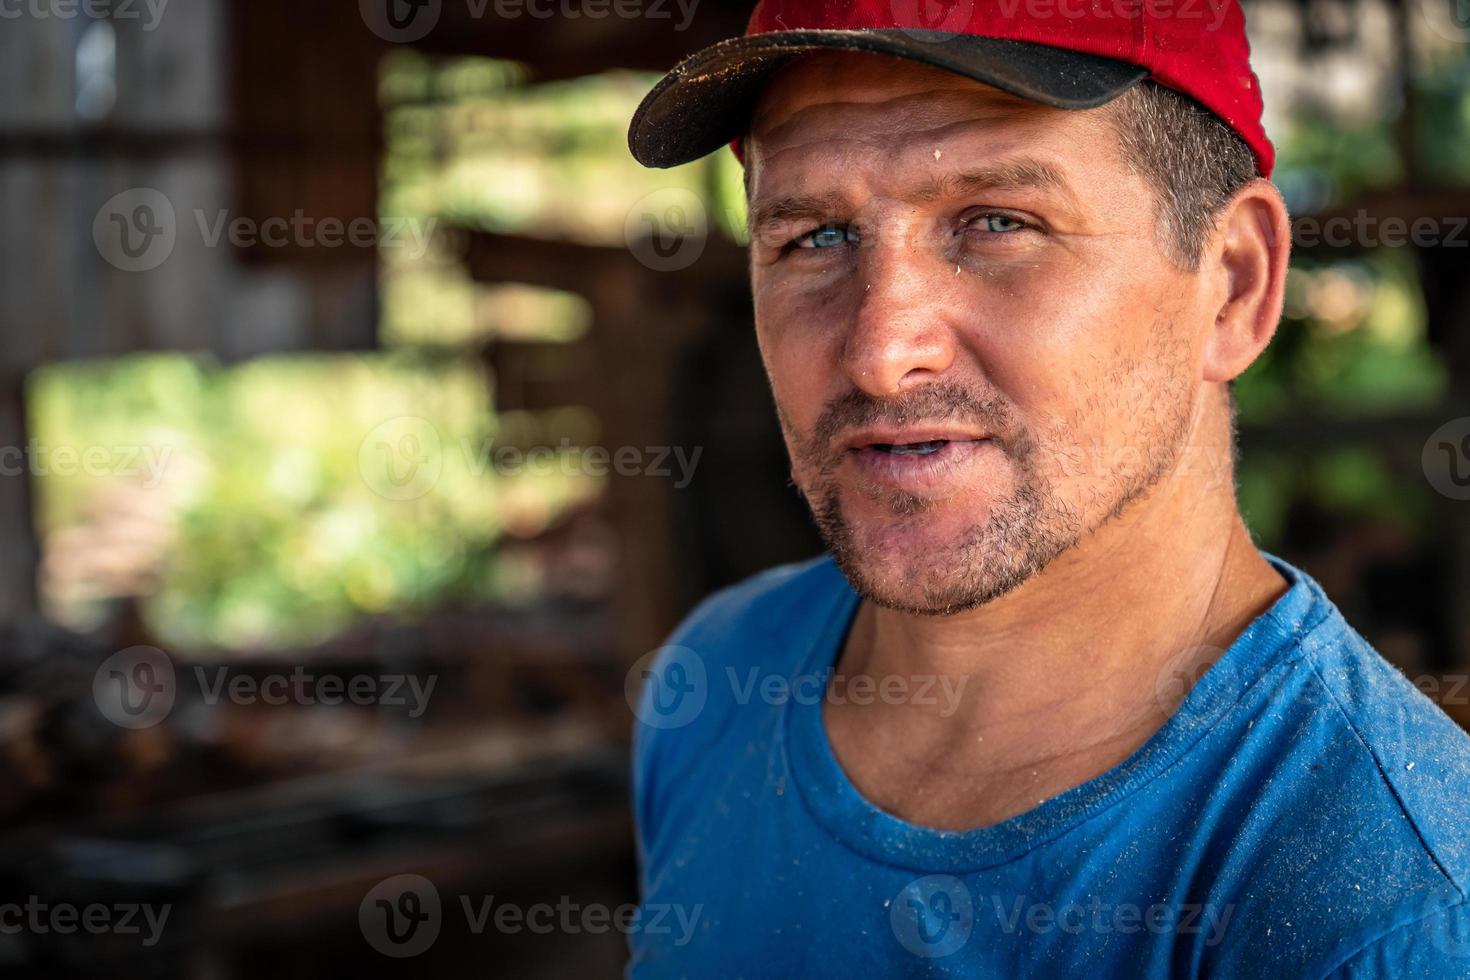 Close up portrait of a handsome male worker wearing a red hat looking at the camera. photo